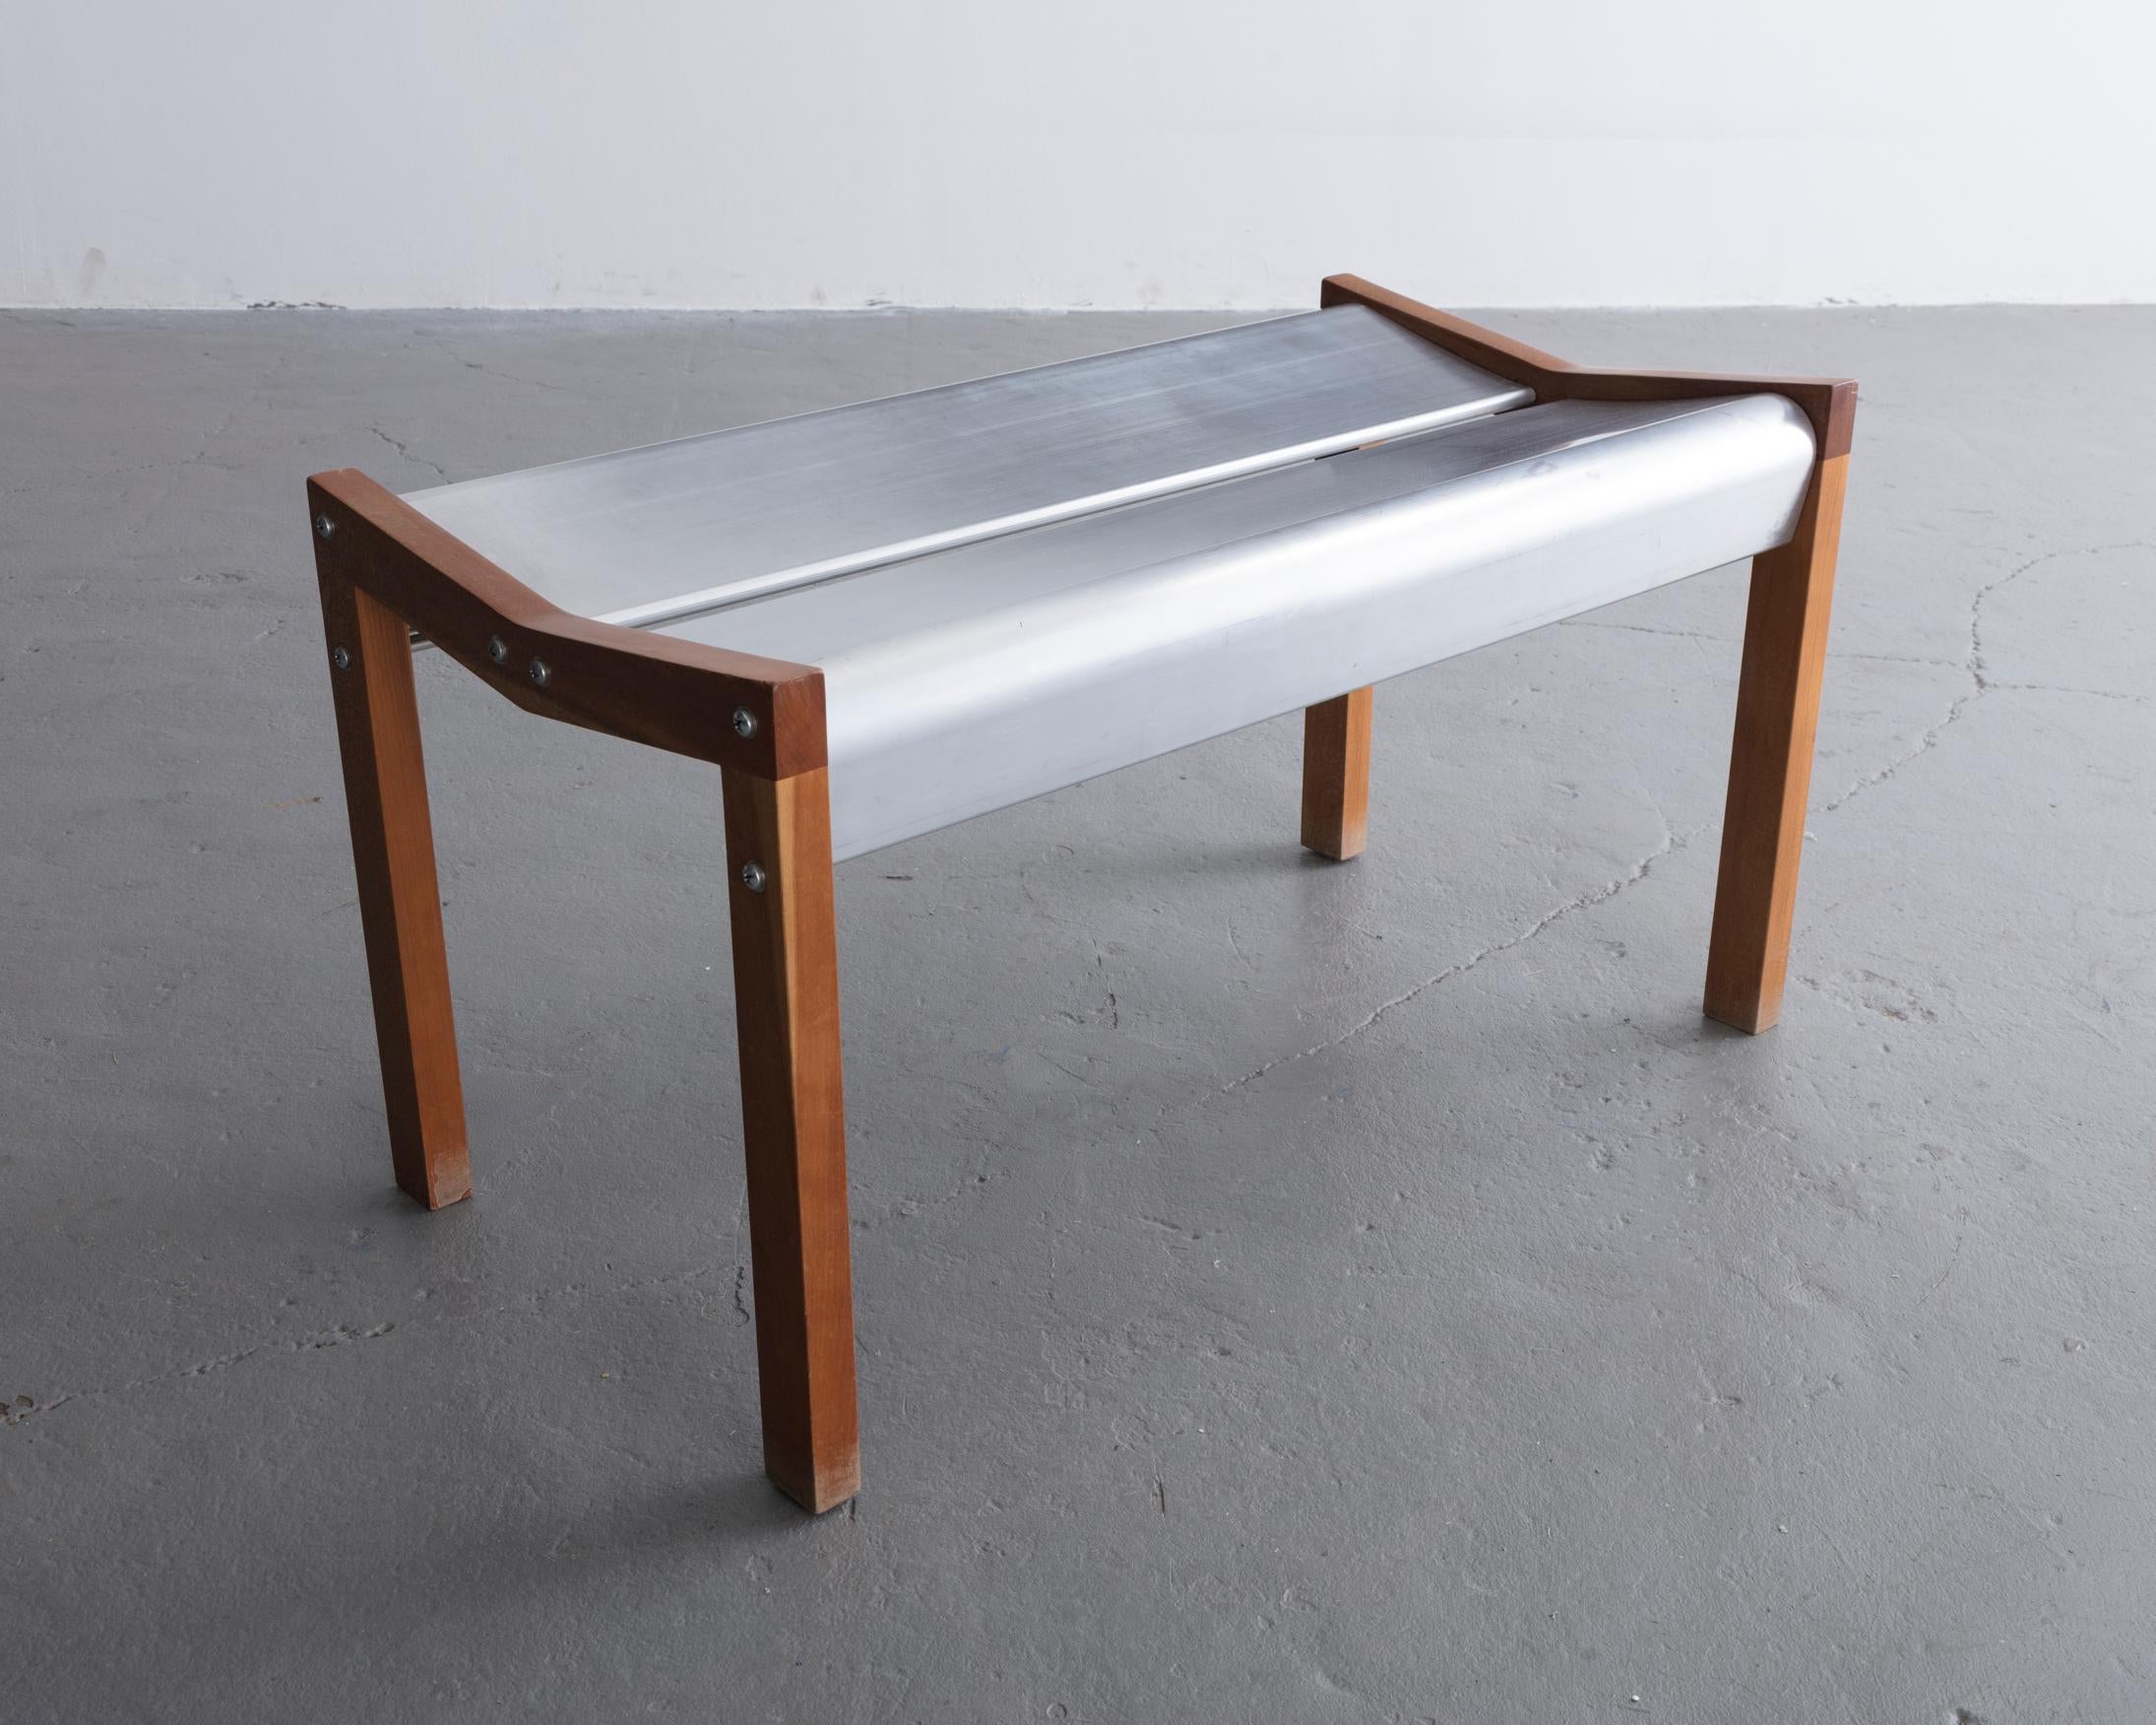 Rasamny bench v. 2 prototype in anodized extruded aluminum and wood. Designed by Ali Tayar, 1999.